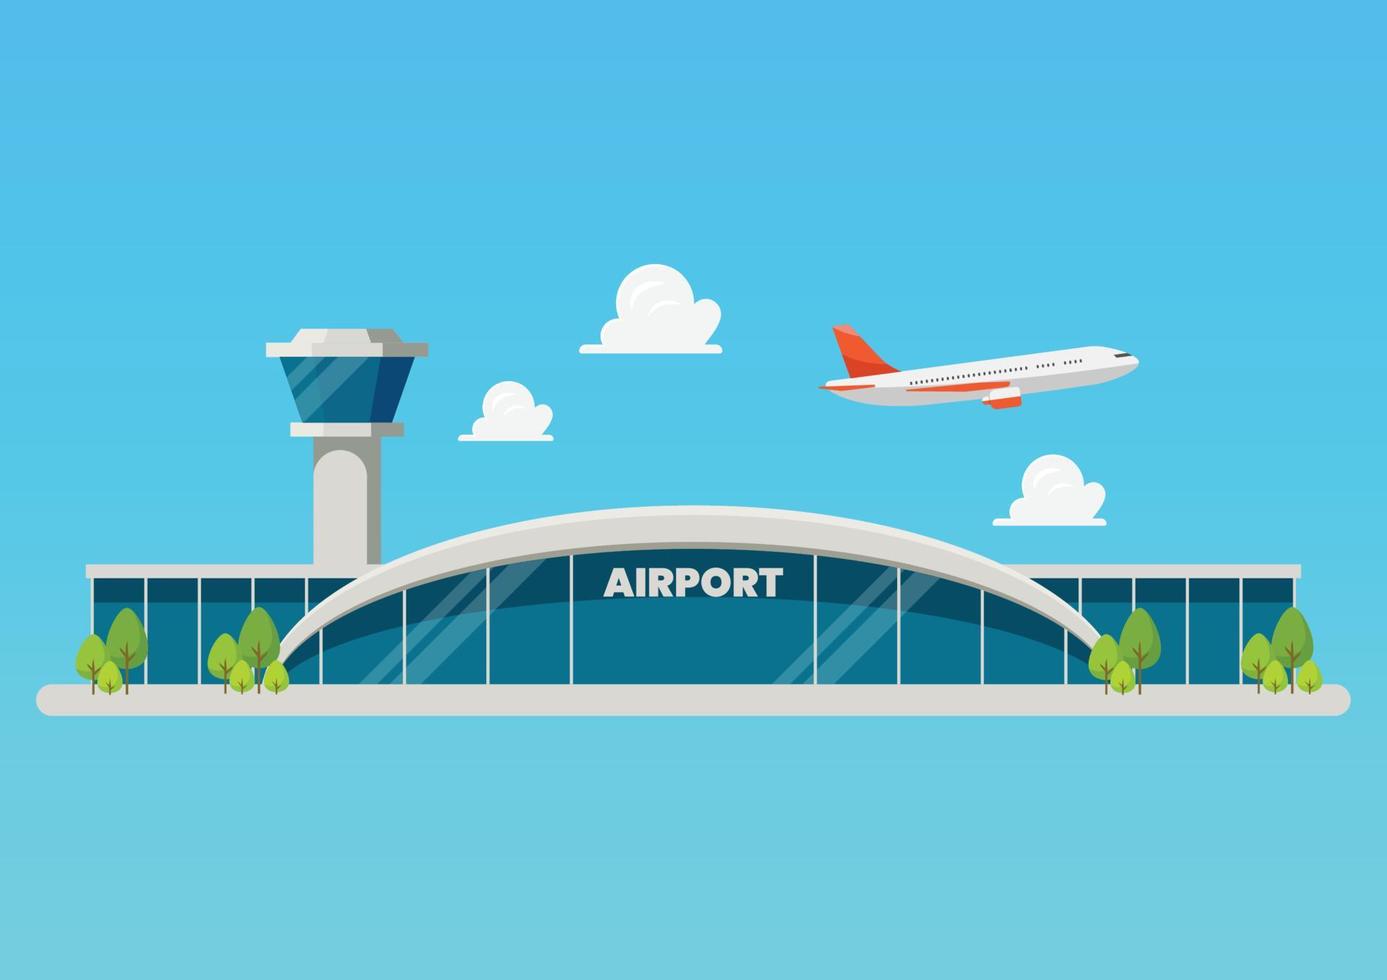 Airport building flat style illustration vector